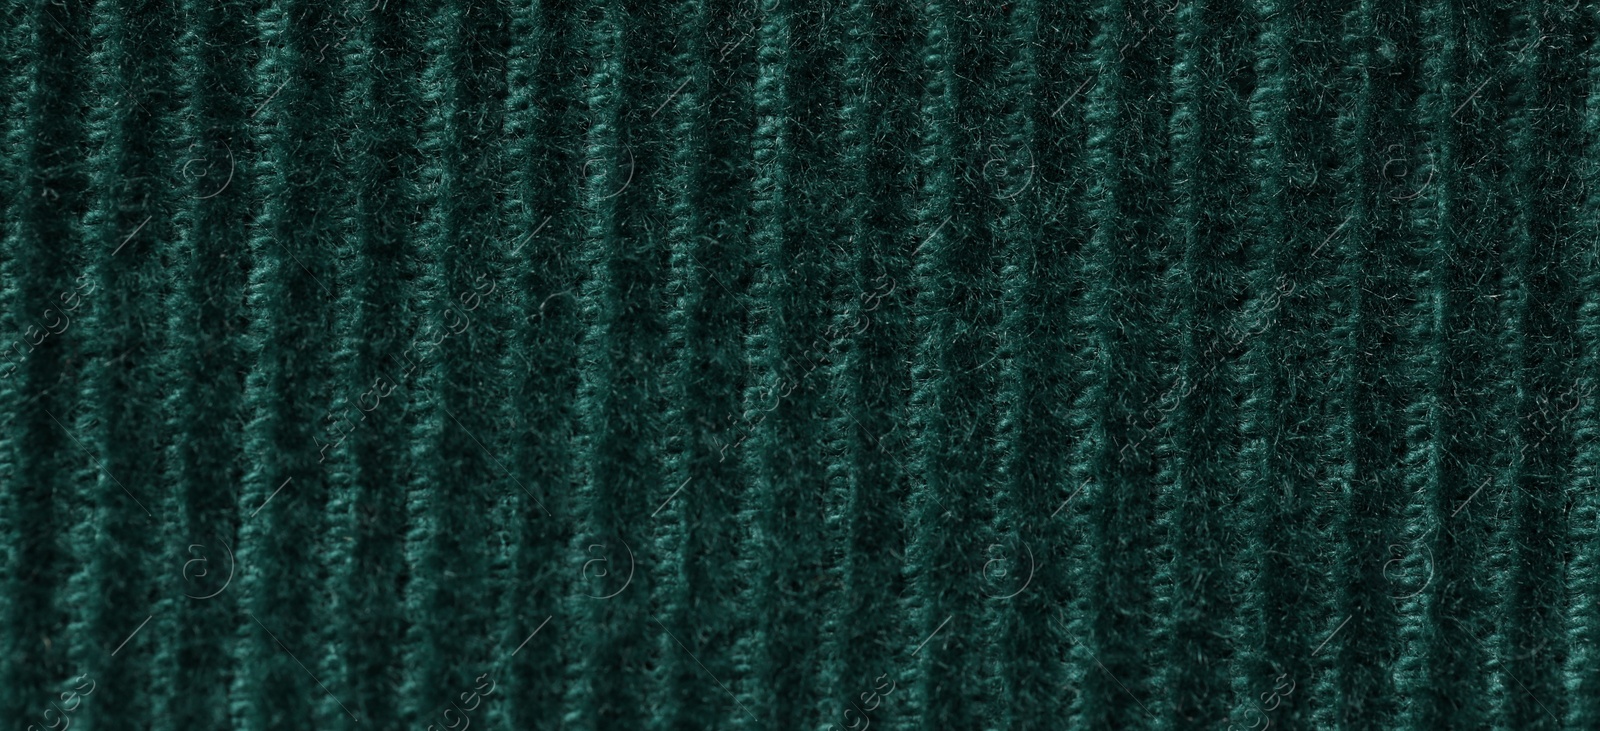 Photo of Texture of soft dark green knitted fabric as background, top view